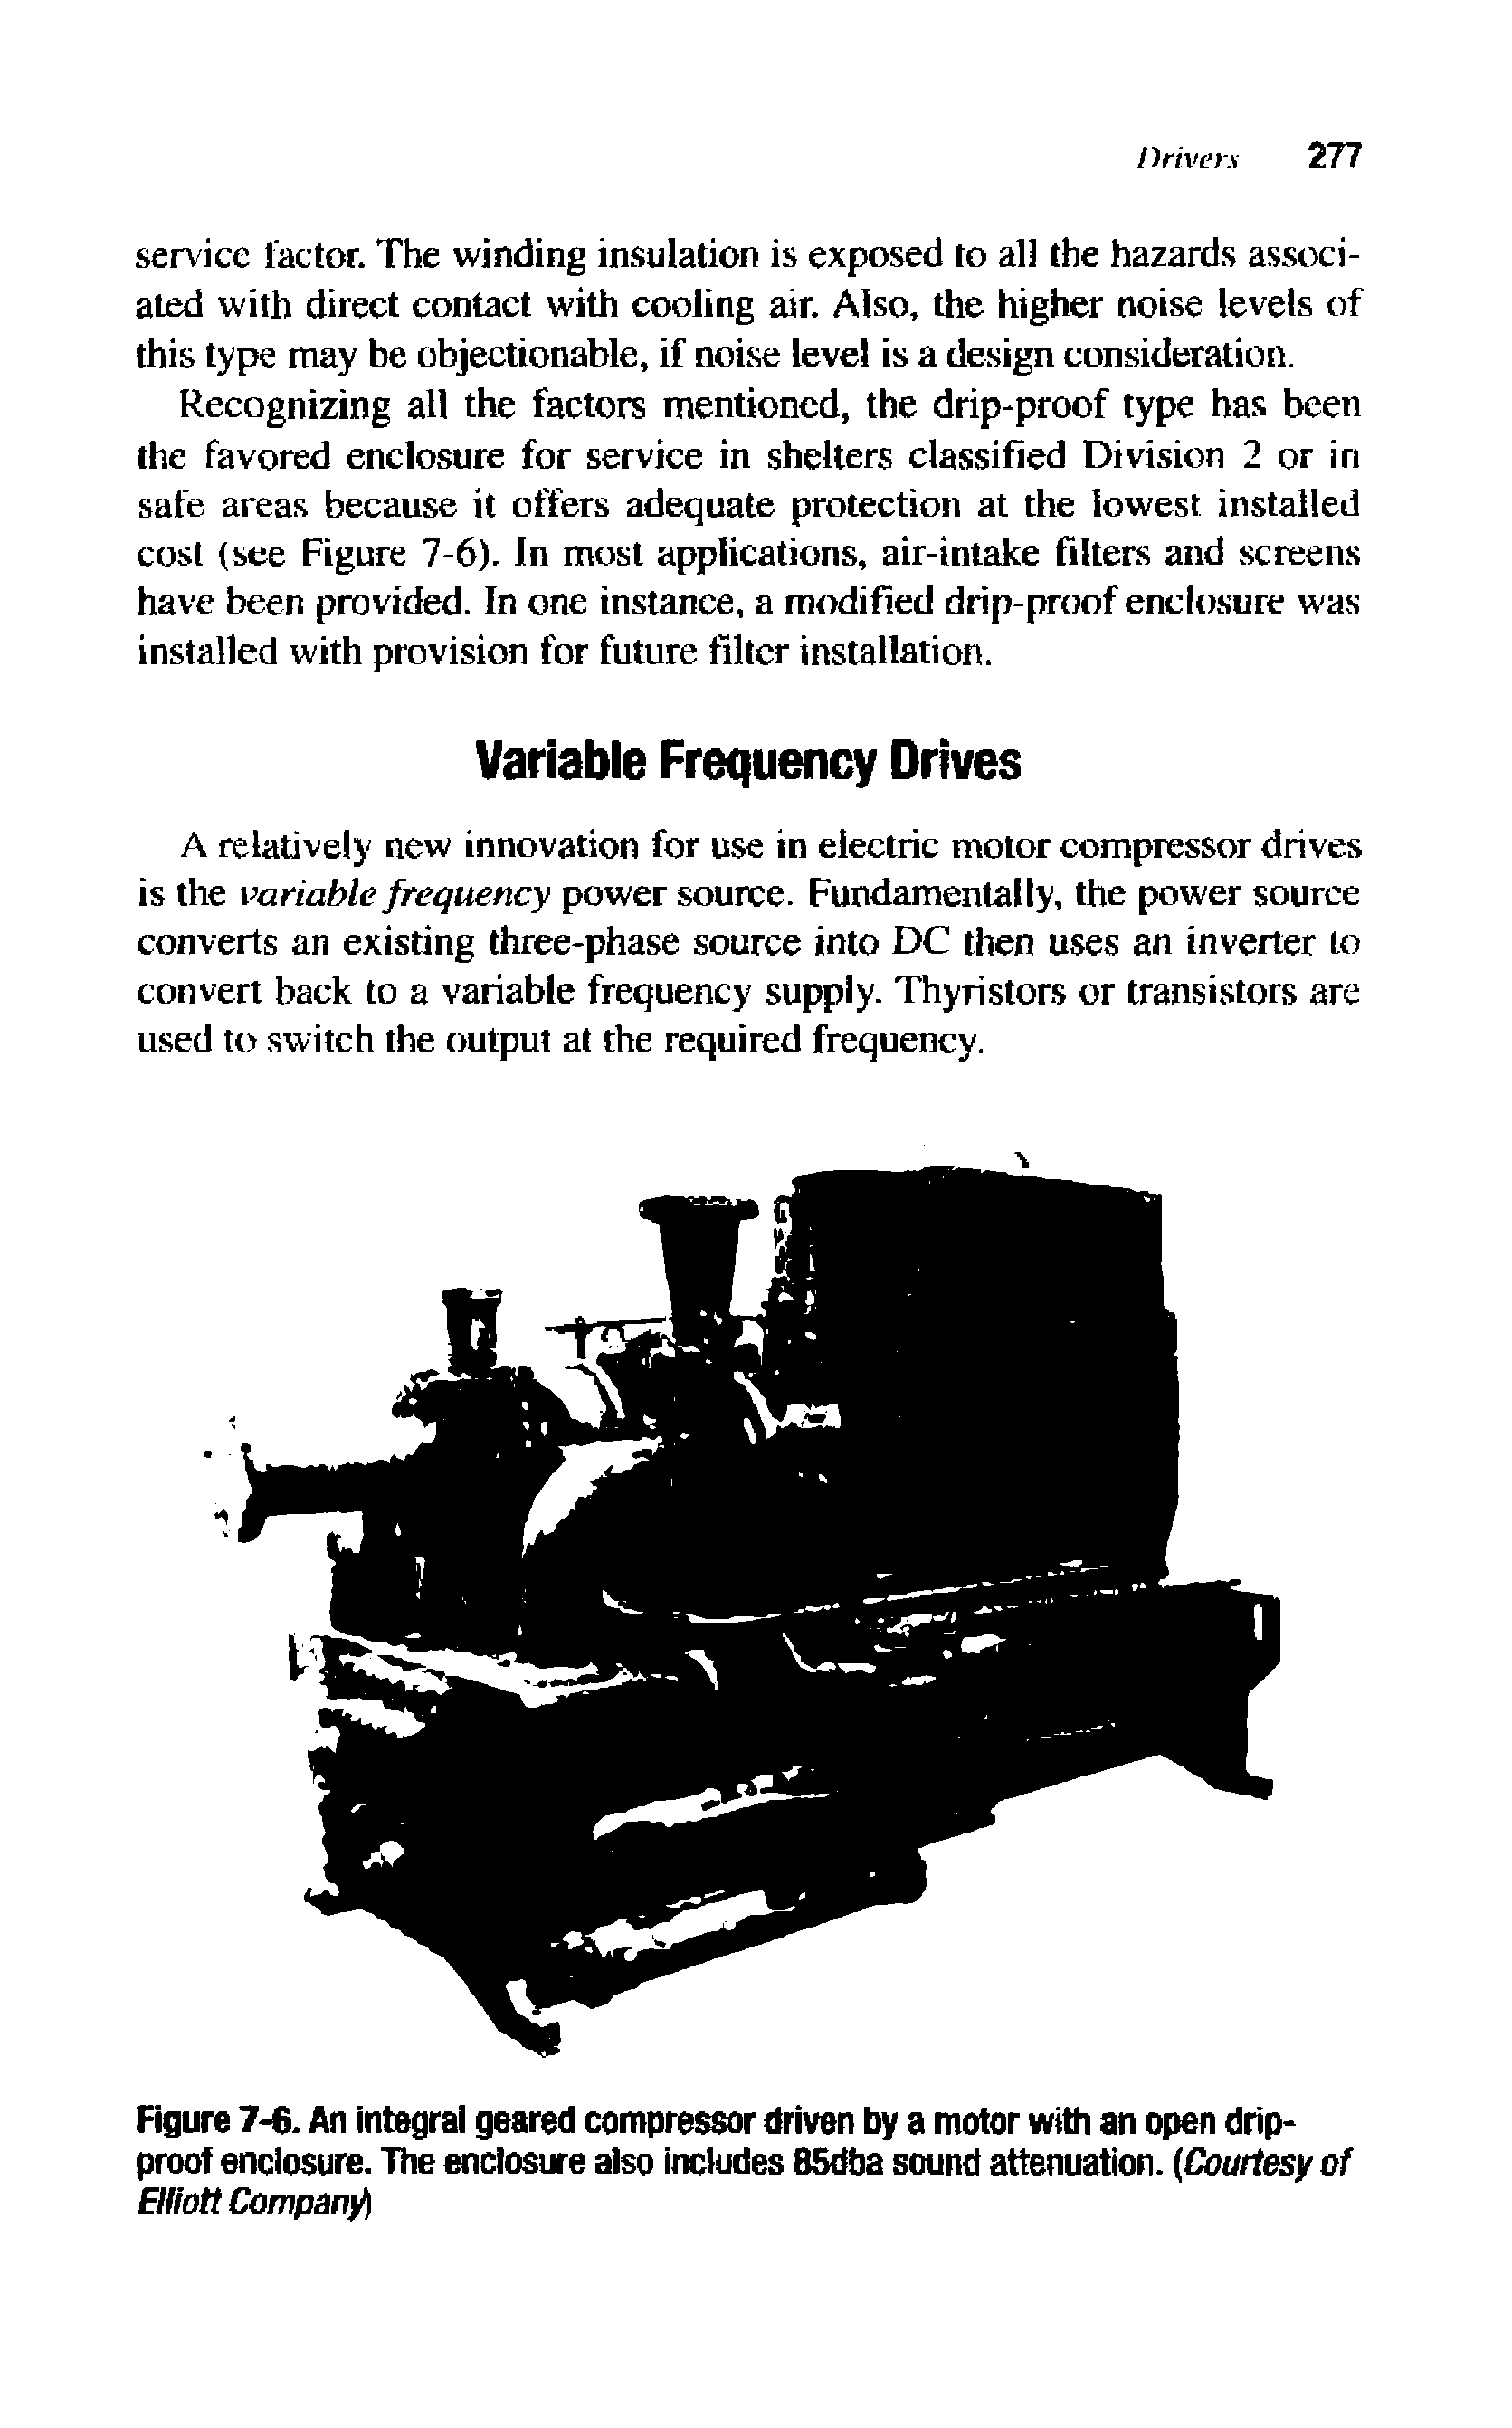 Figure 7-6. An integral geared compressor driven by a motor with an open drip-proof enclosure. The enclosure also includes 85dba sound attenuation. Courtesy of Elliott Company ...